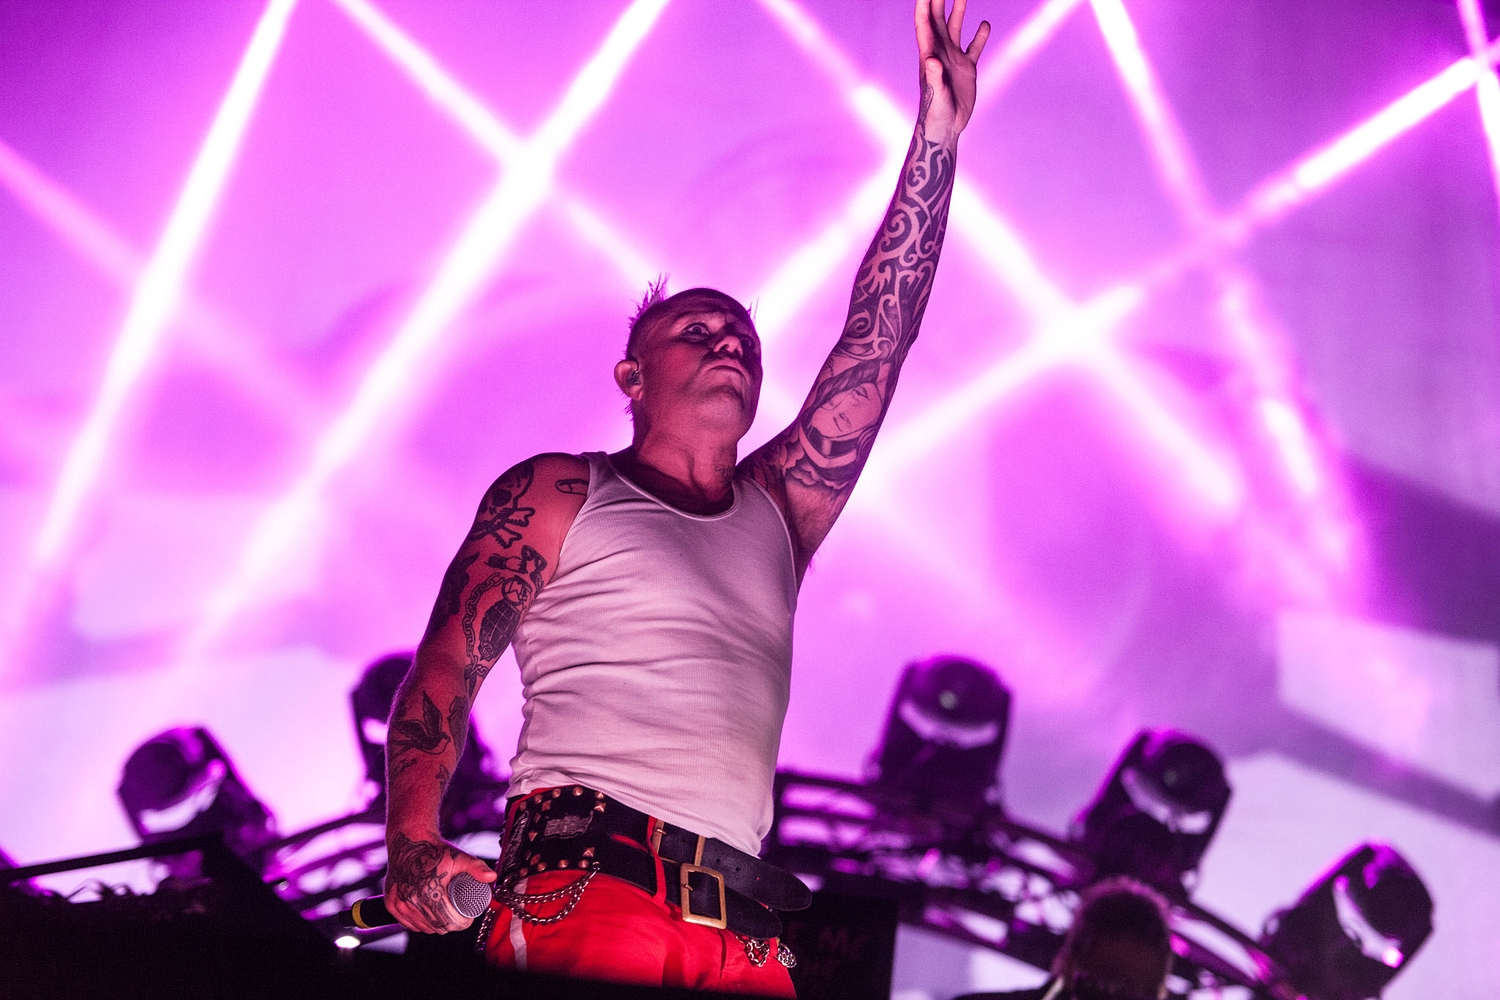 The Prodigy frontman Keith Flint dead at 49